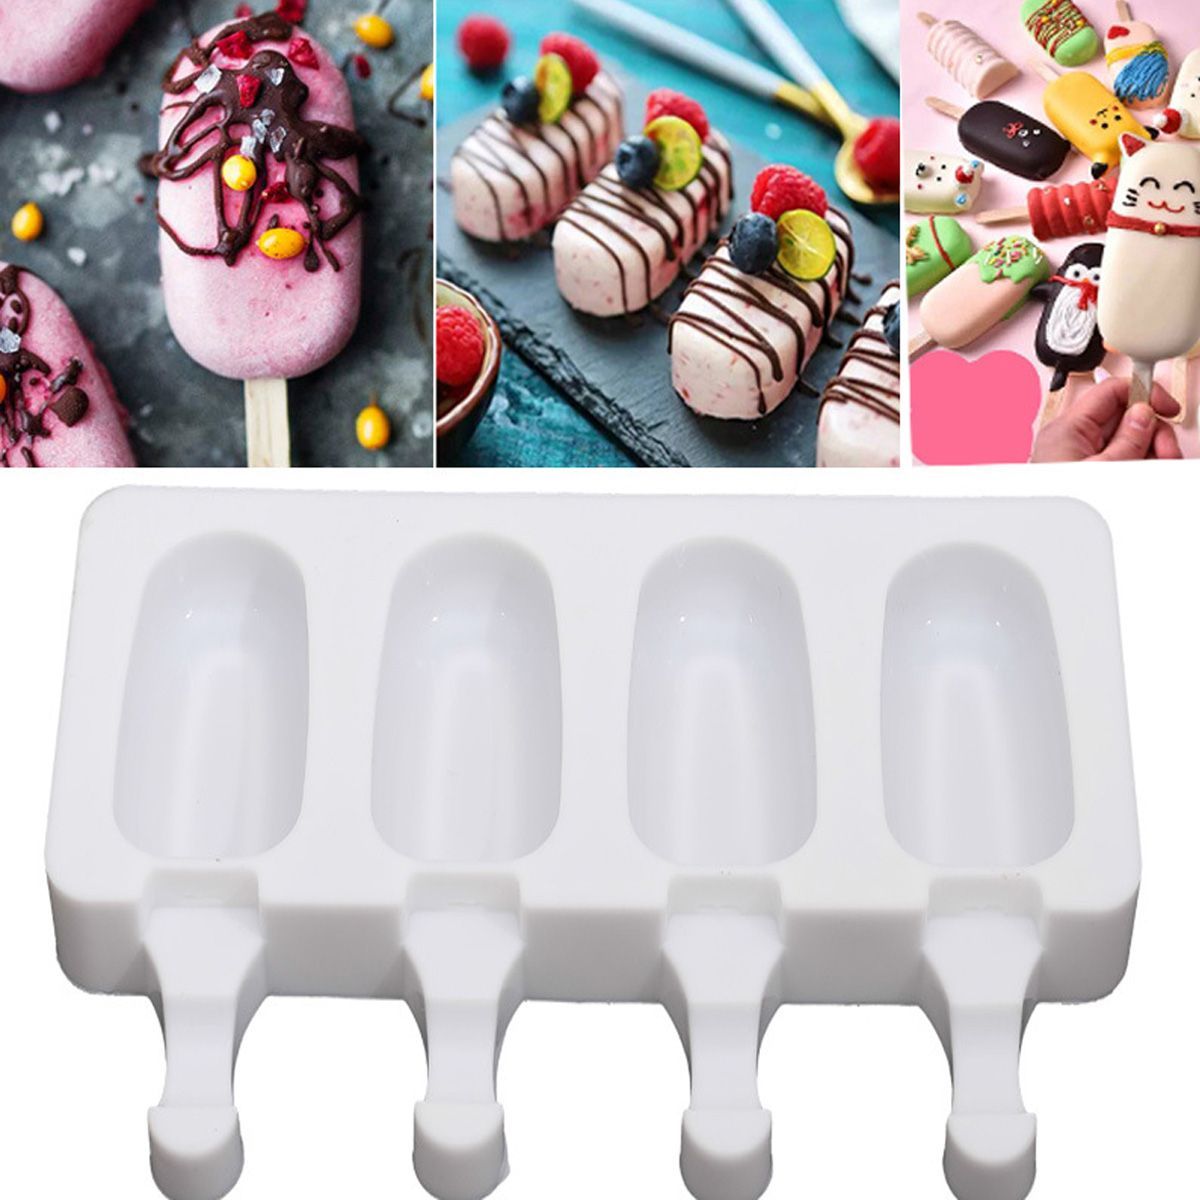 4-Cell-Silicone-Frozen-Ice-Cream-Mold-Juice-Popsicle-Maker-Ice-Lolly-Pop-Mould-1507988